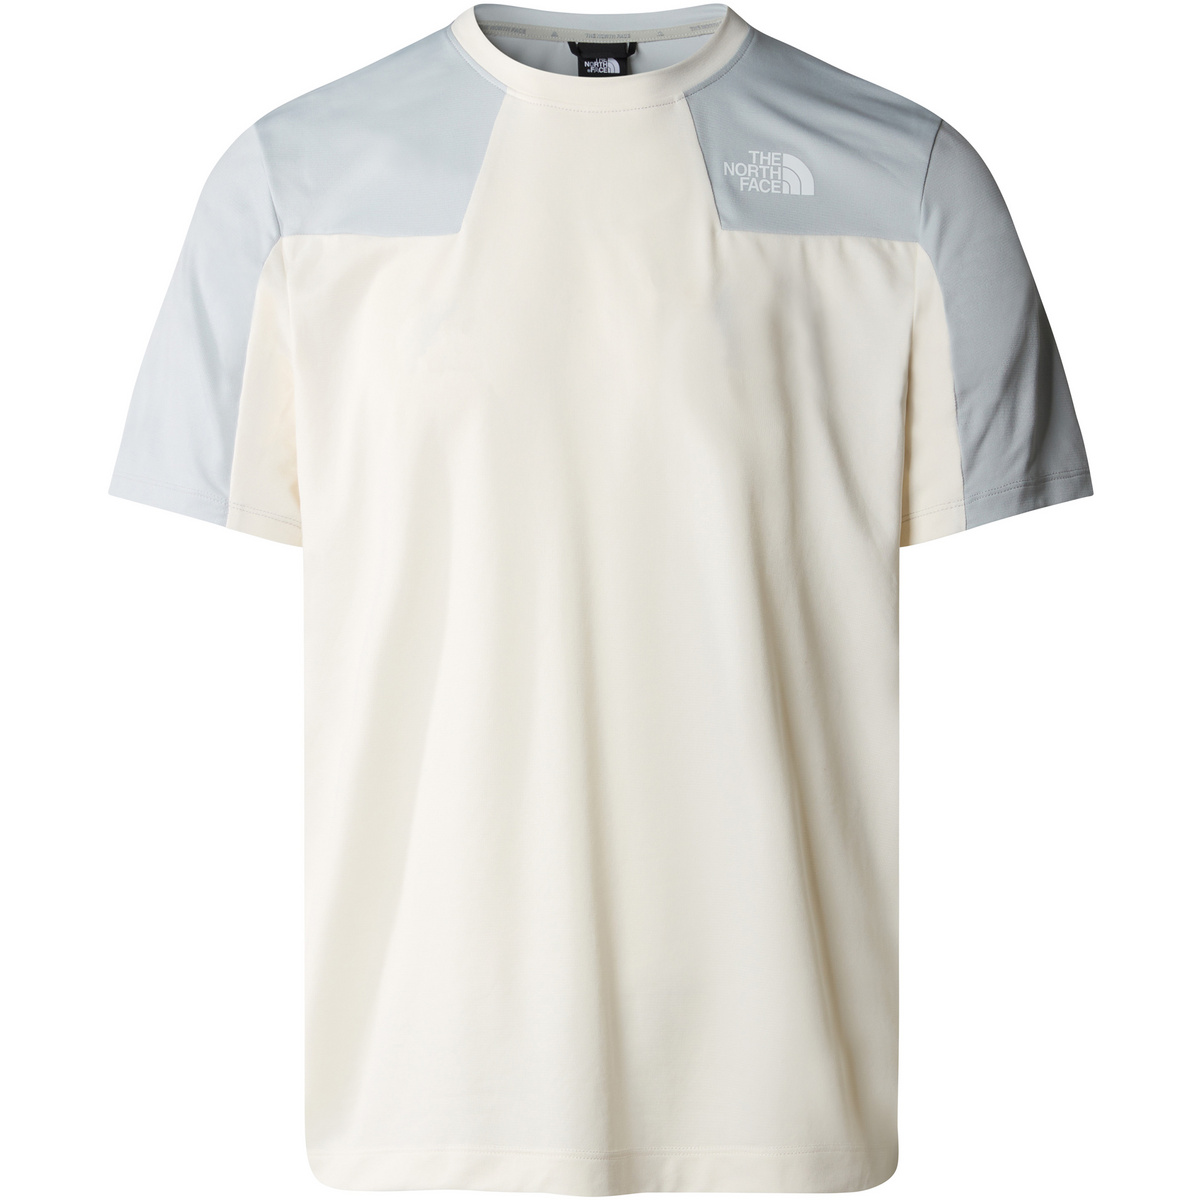 The North Face Herren Ma T-Shirt von The North Face